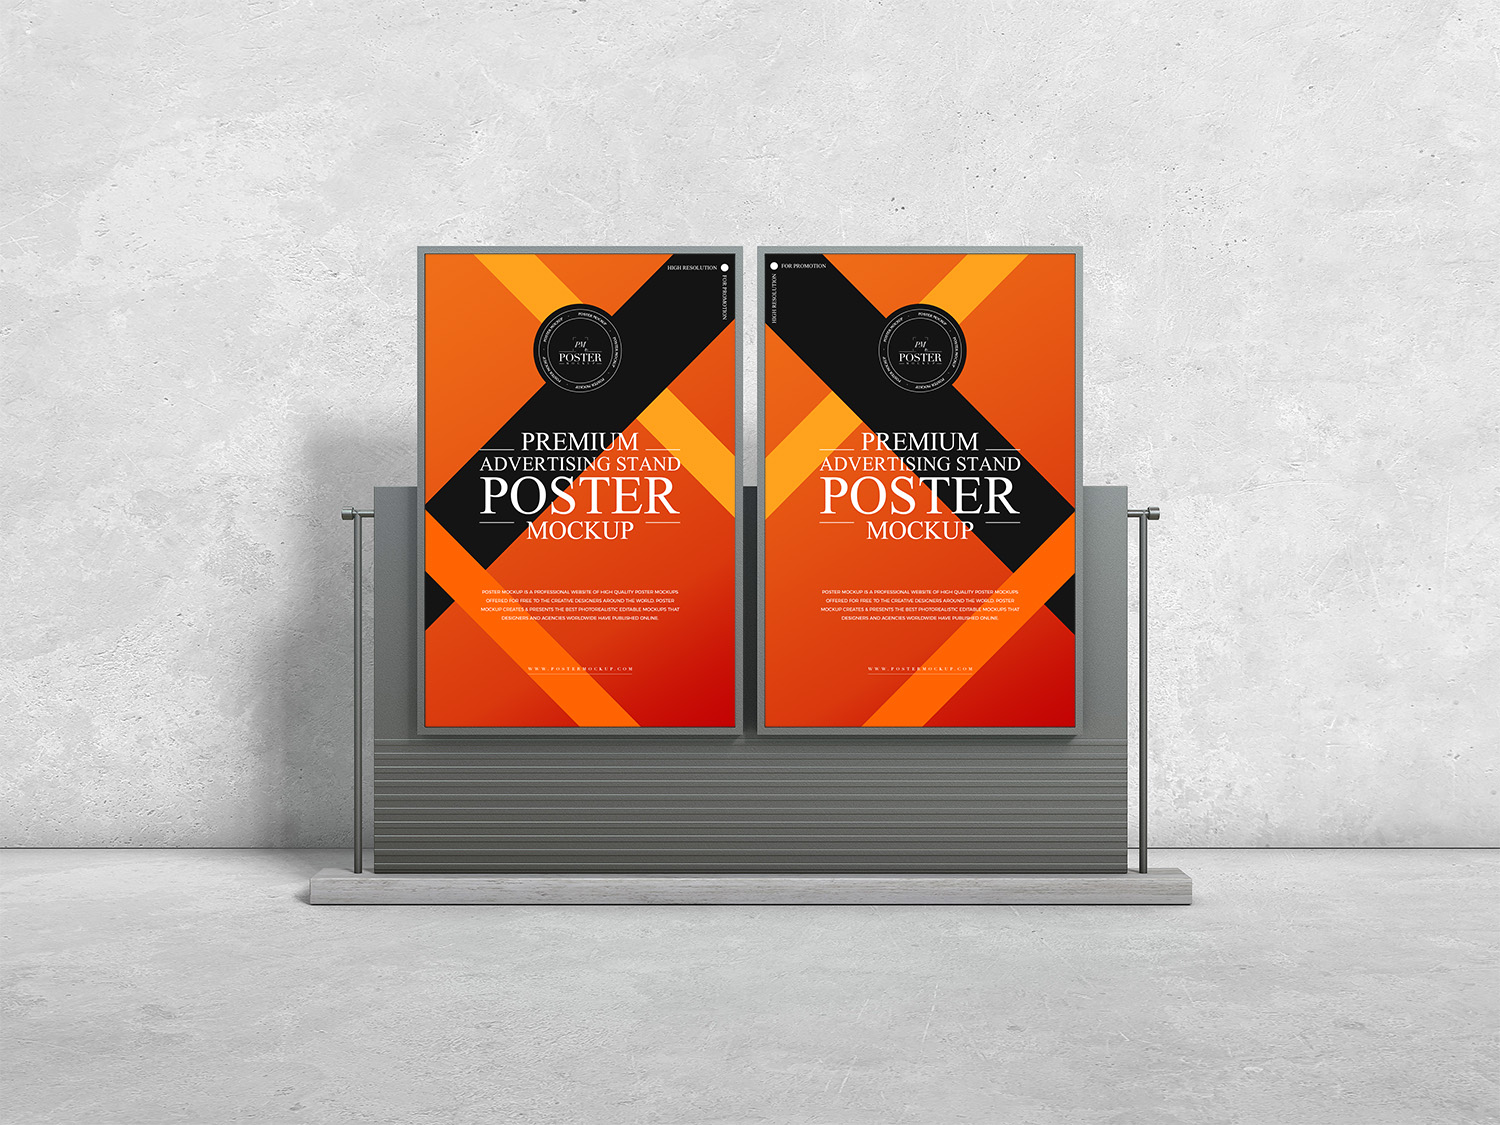 Free Advertising Stand Dual Poster Mockup